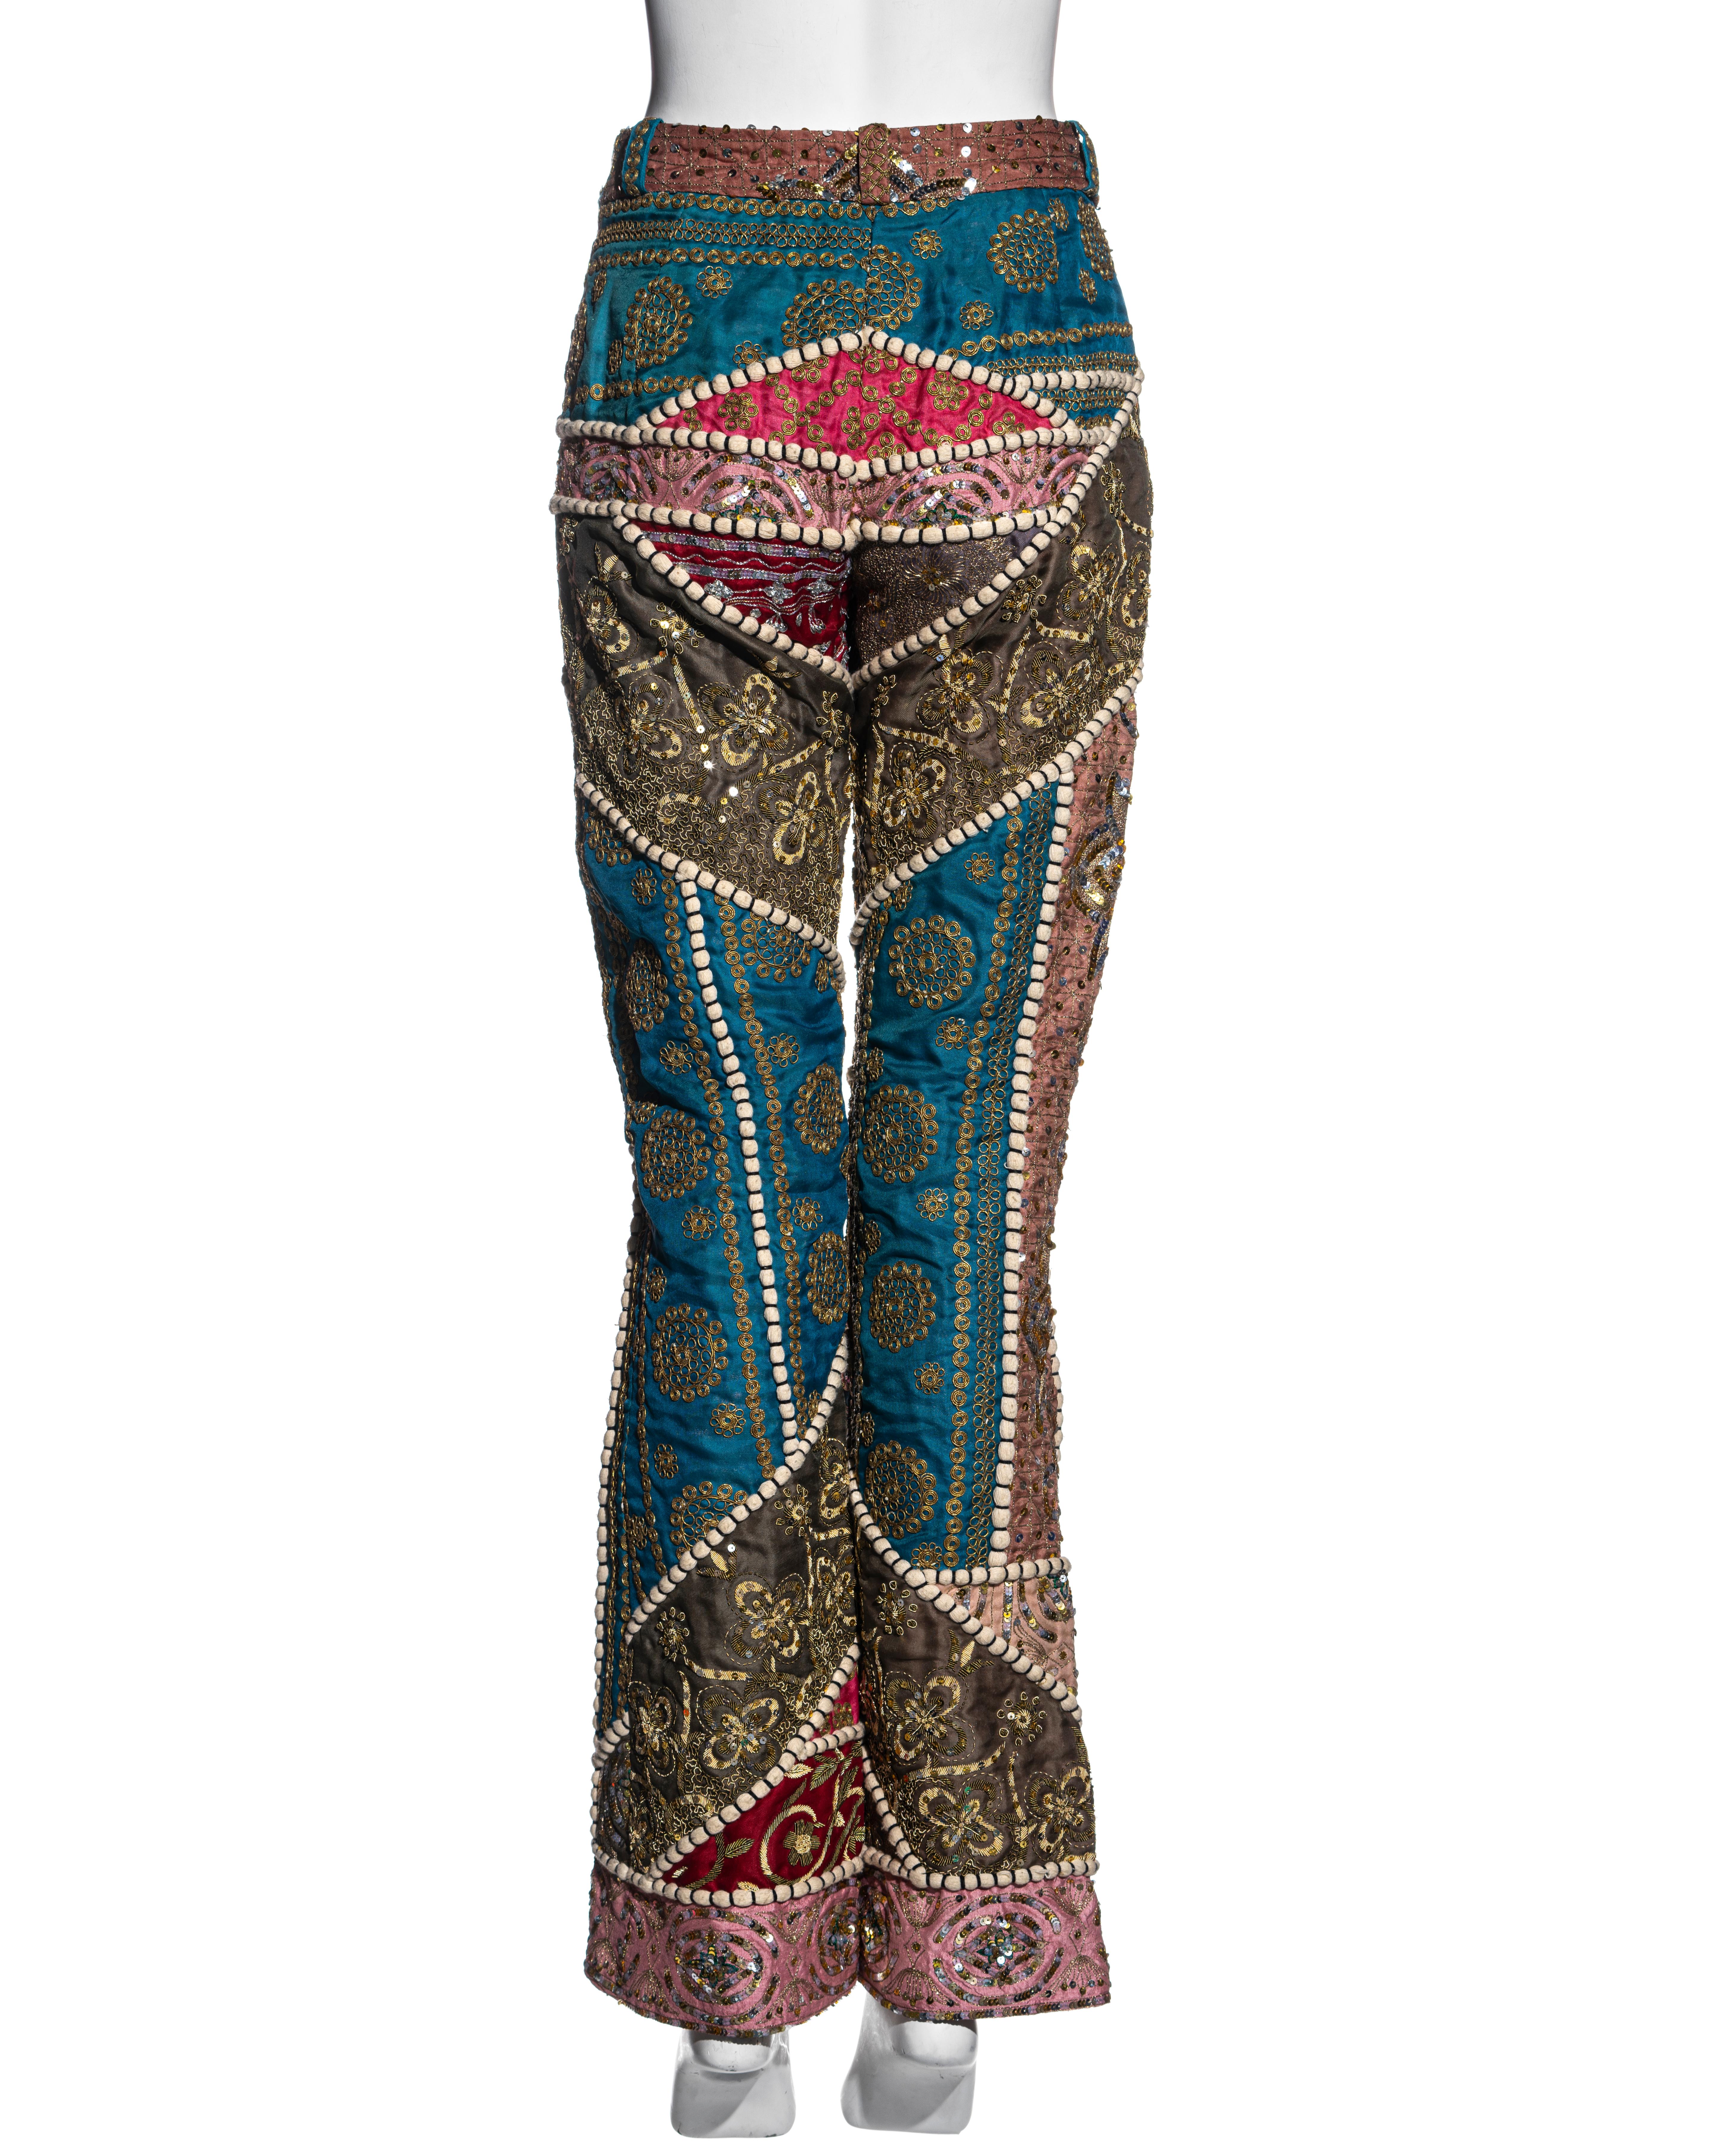 Gianfranco Ferre raw silk patchwork embroidered pants, ss 2002 For Sale 7